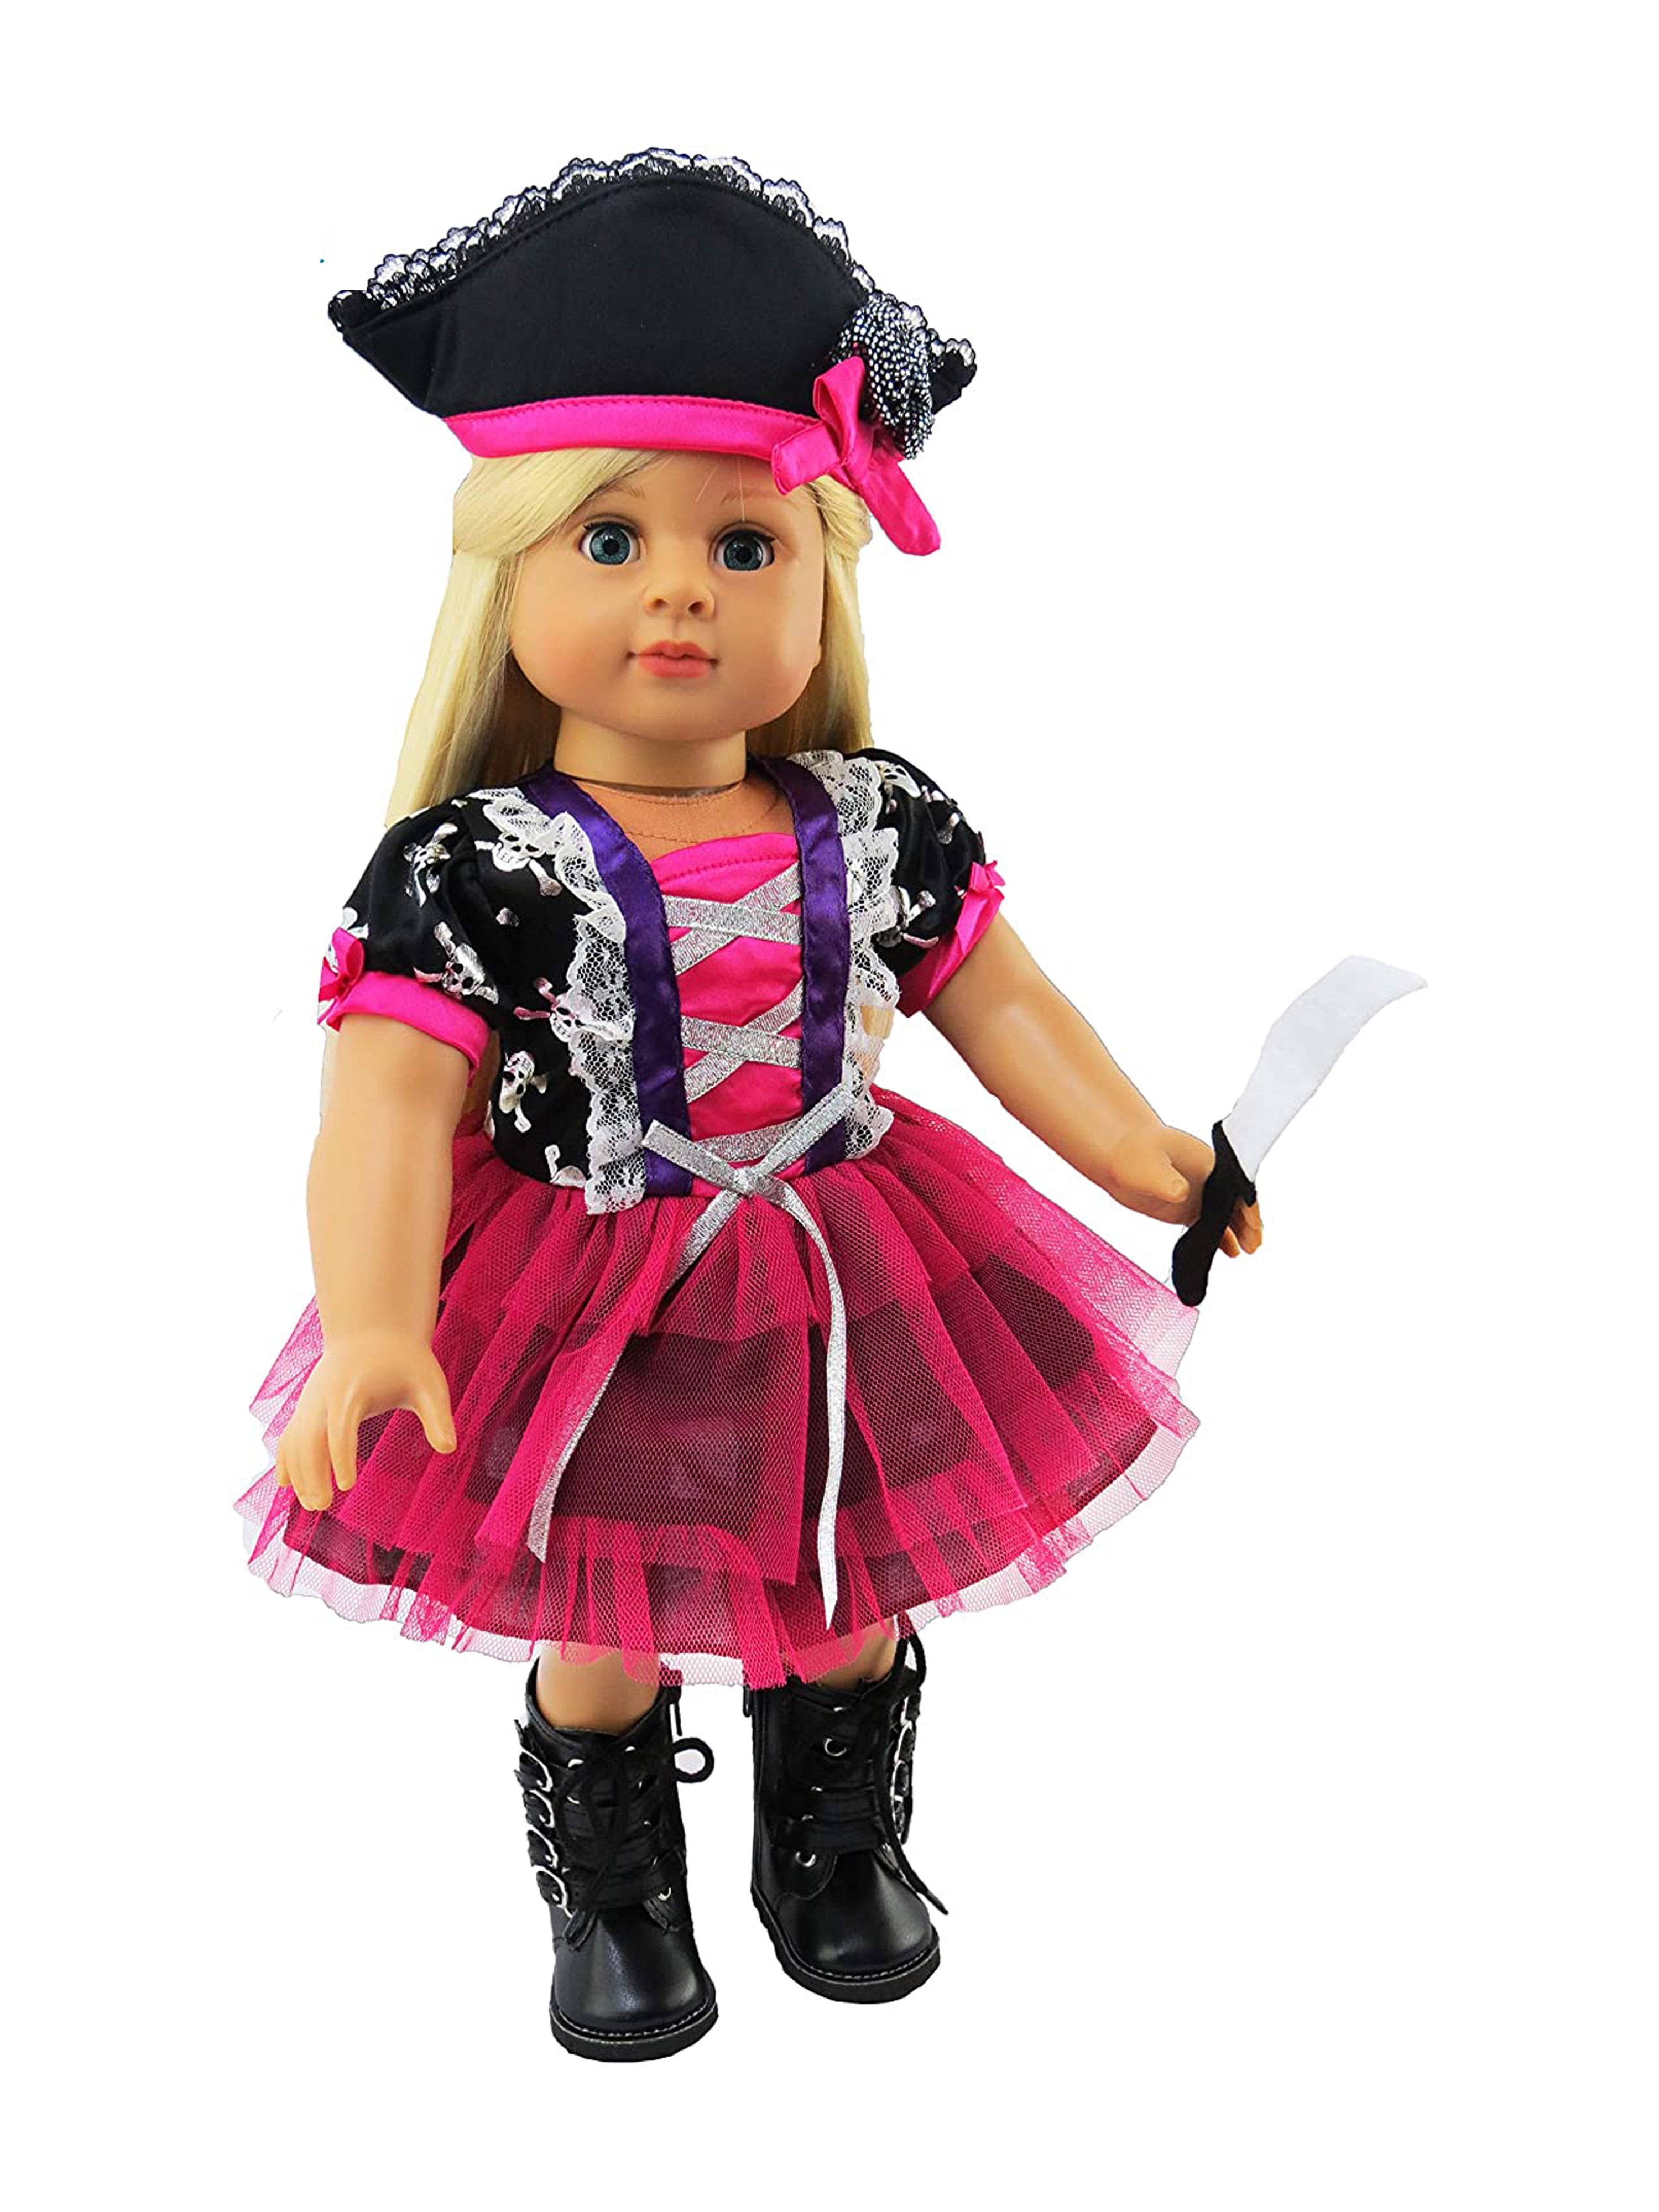 Doll Costume 18 Inch Costume Pirate Costume 18 Inch Doll Clothes American Girl Like Doll Costume Fits Like American Girl Doll,